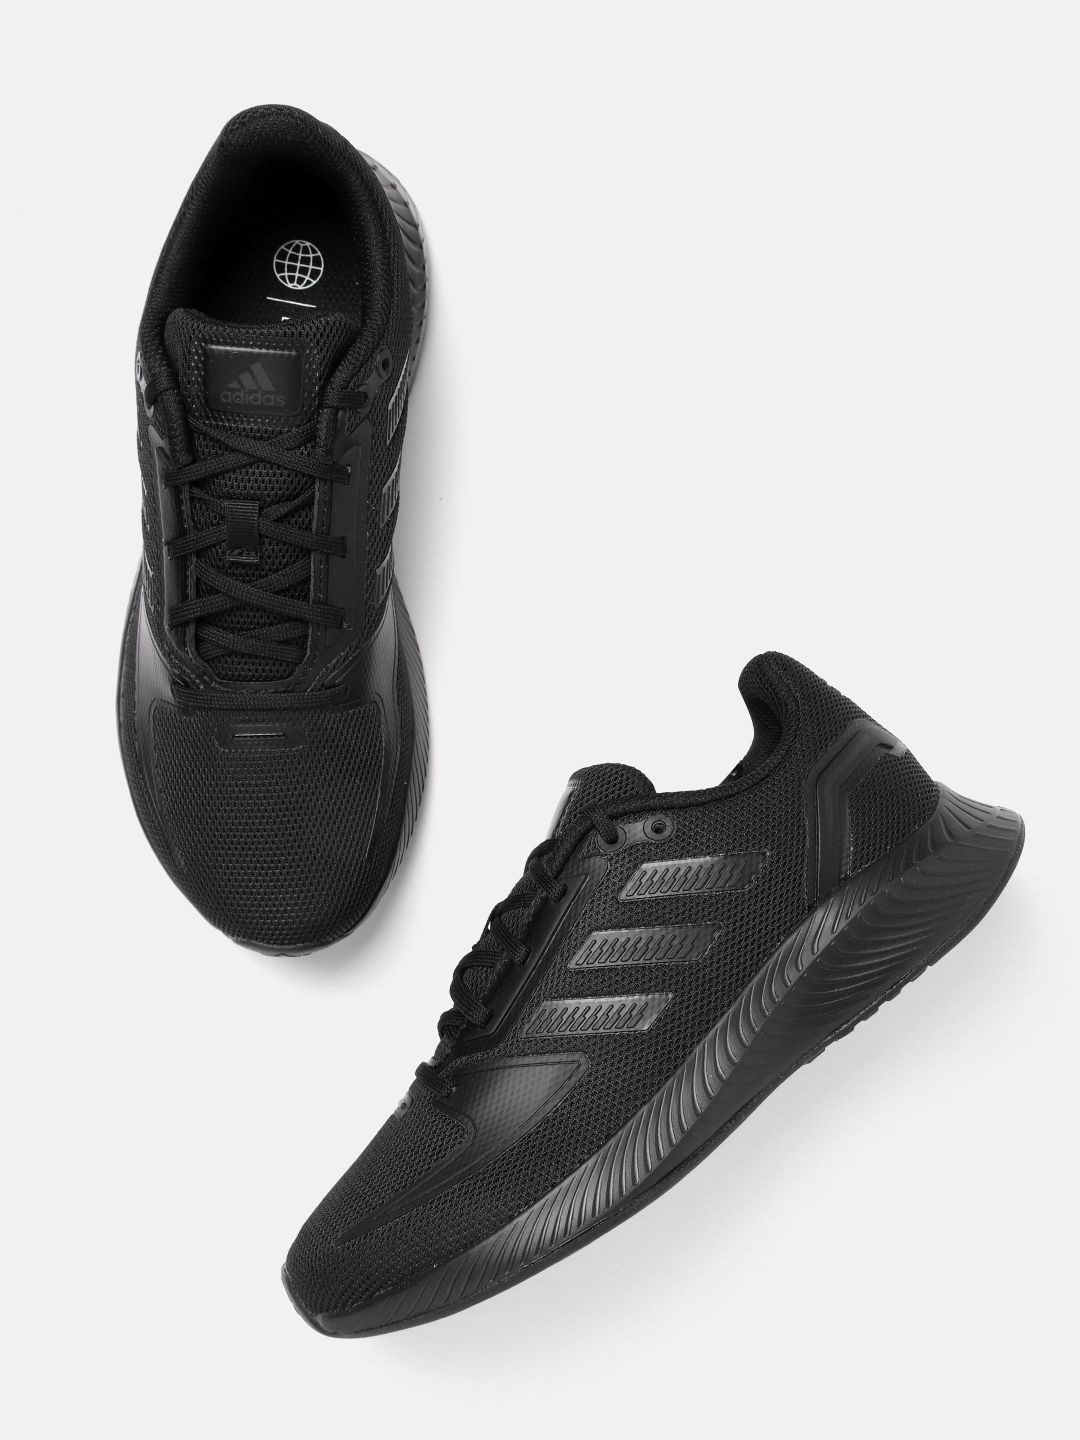 ADIDAS Women Black Woven Design Runfalcon 2.0 Running Shoes Price in India